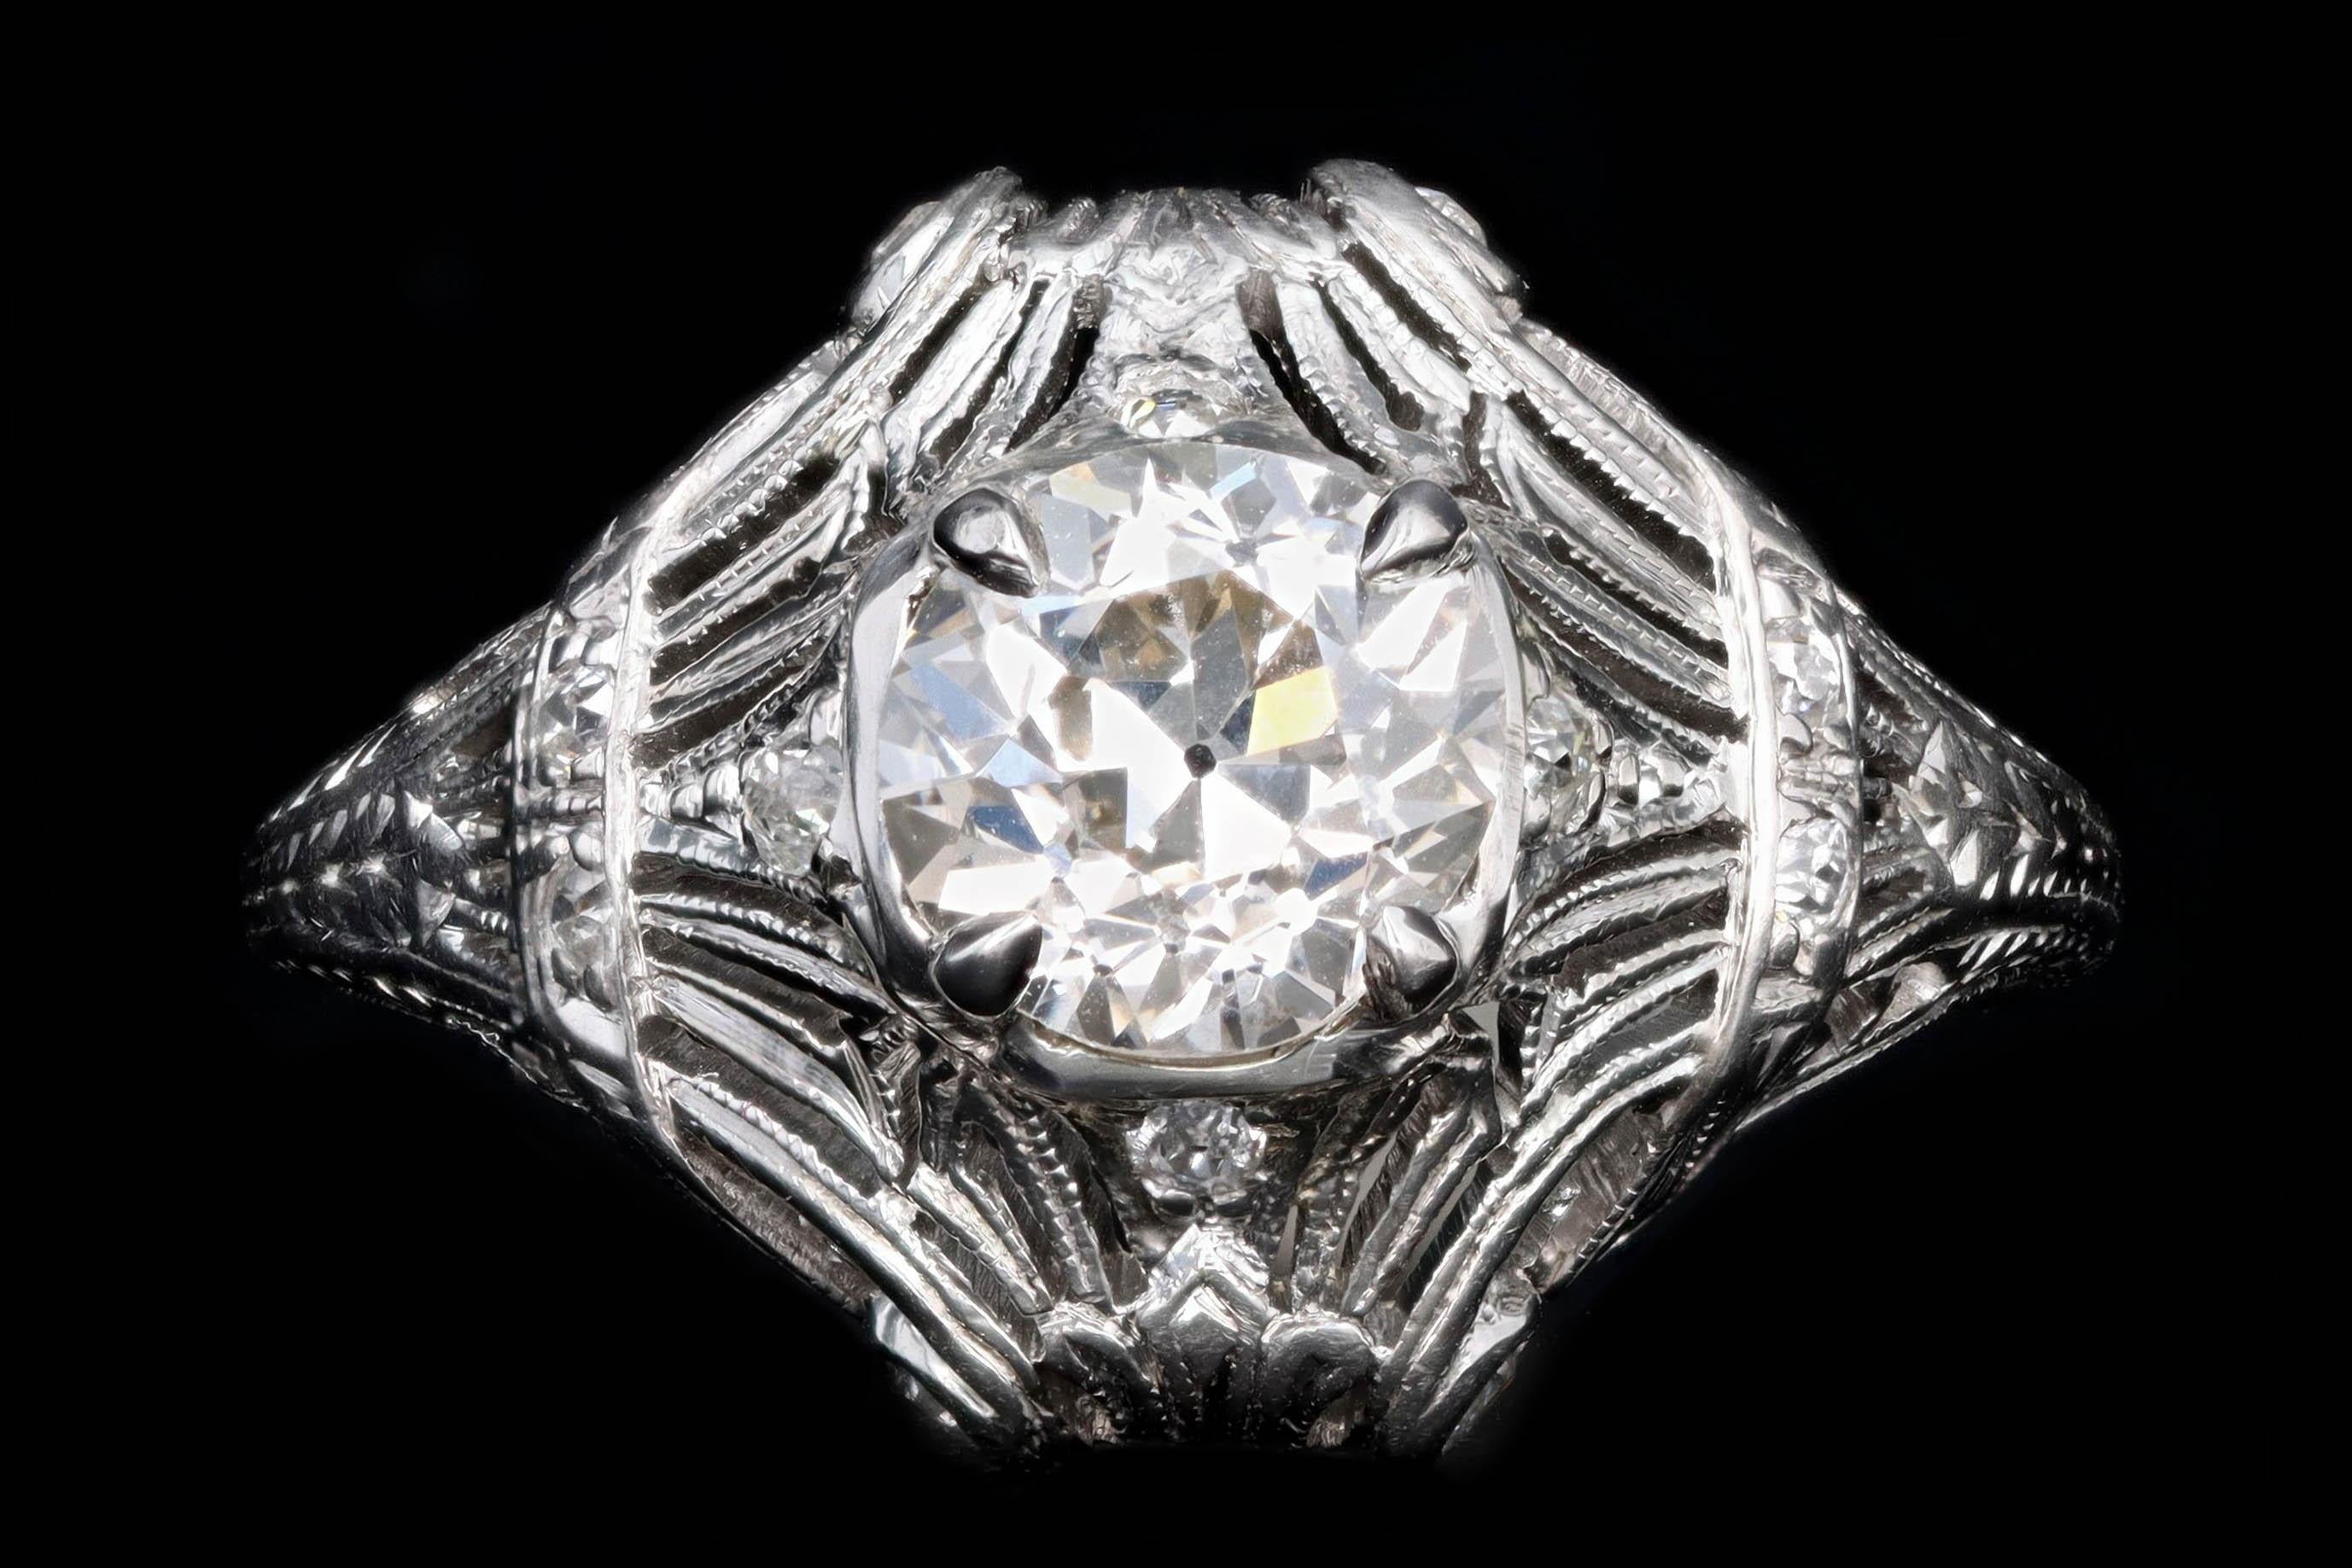 Era: Art Deco

Composition: Platinum 

Primary Stone: Old European Cut Diamond

Carat Weight: 1.31 Carats

Color/Clarity: K / VS2

Accent Stone: Additional Old European Cut Diamonds

Carat Weight: Approximately .15 Carats

Color/Clarity: H / I - VS1